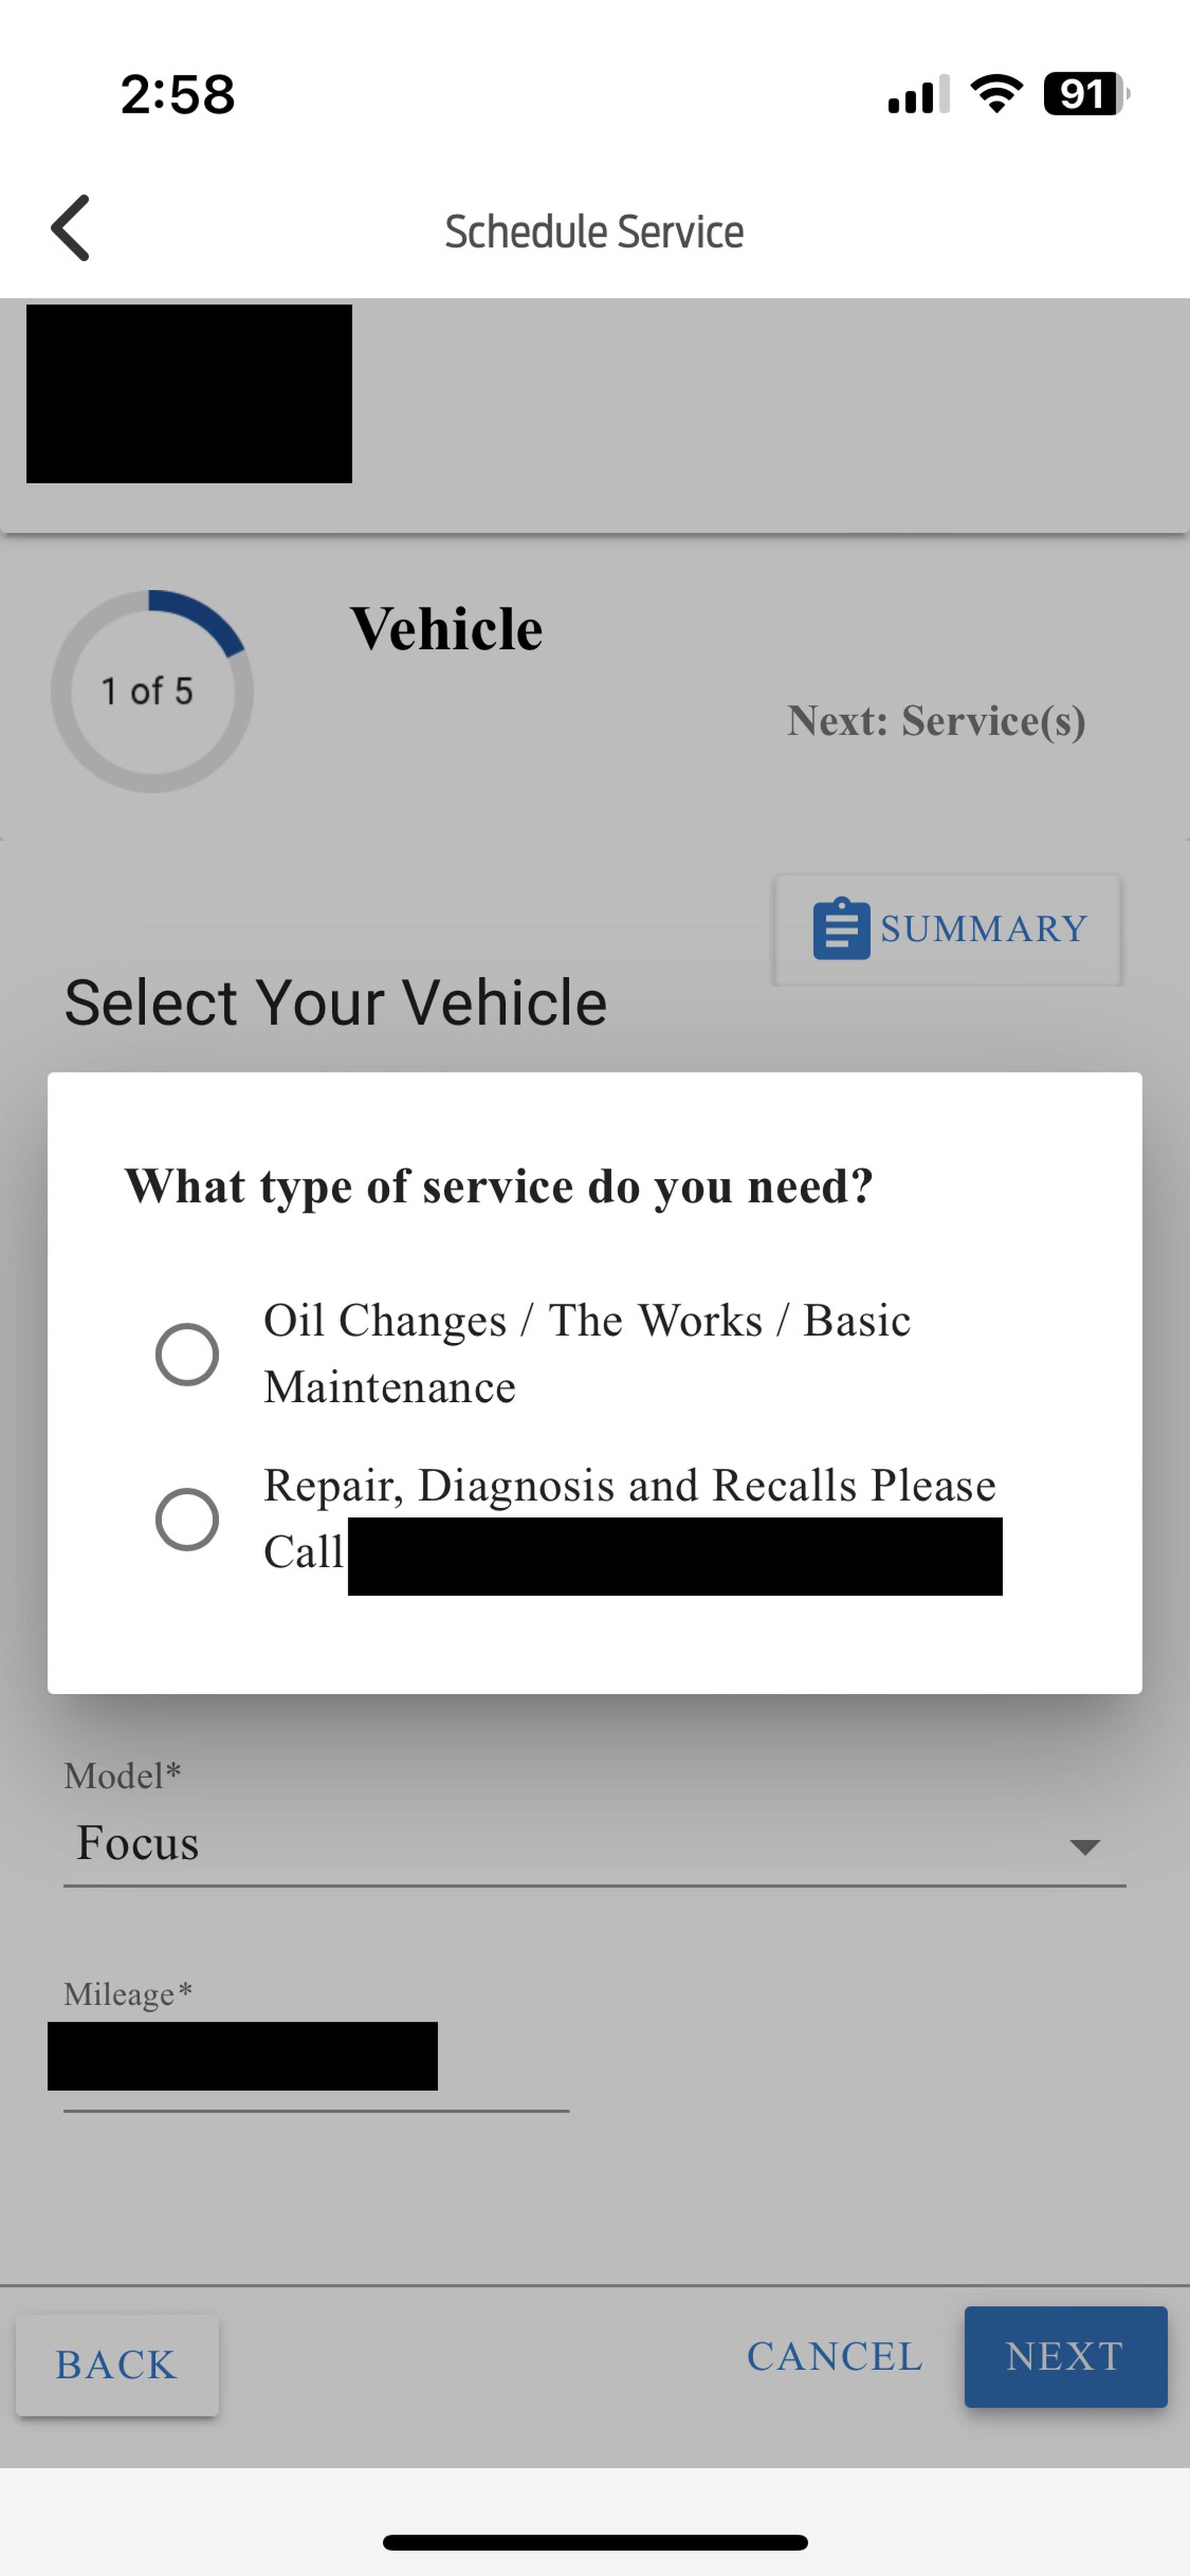 The FordPass app lets you book appointments, but I personally couldn’t find any dealership that provided mobile service options yet.